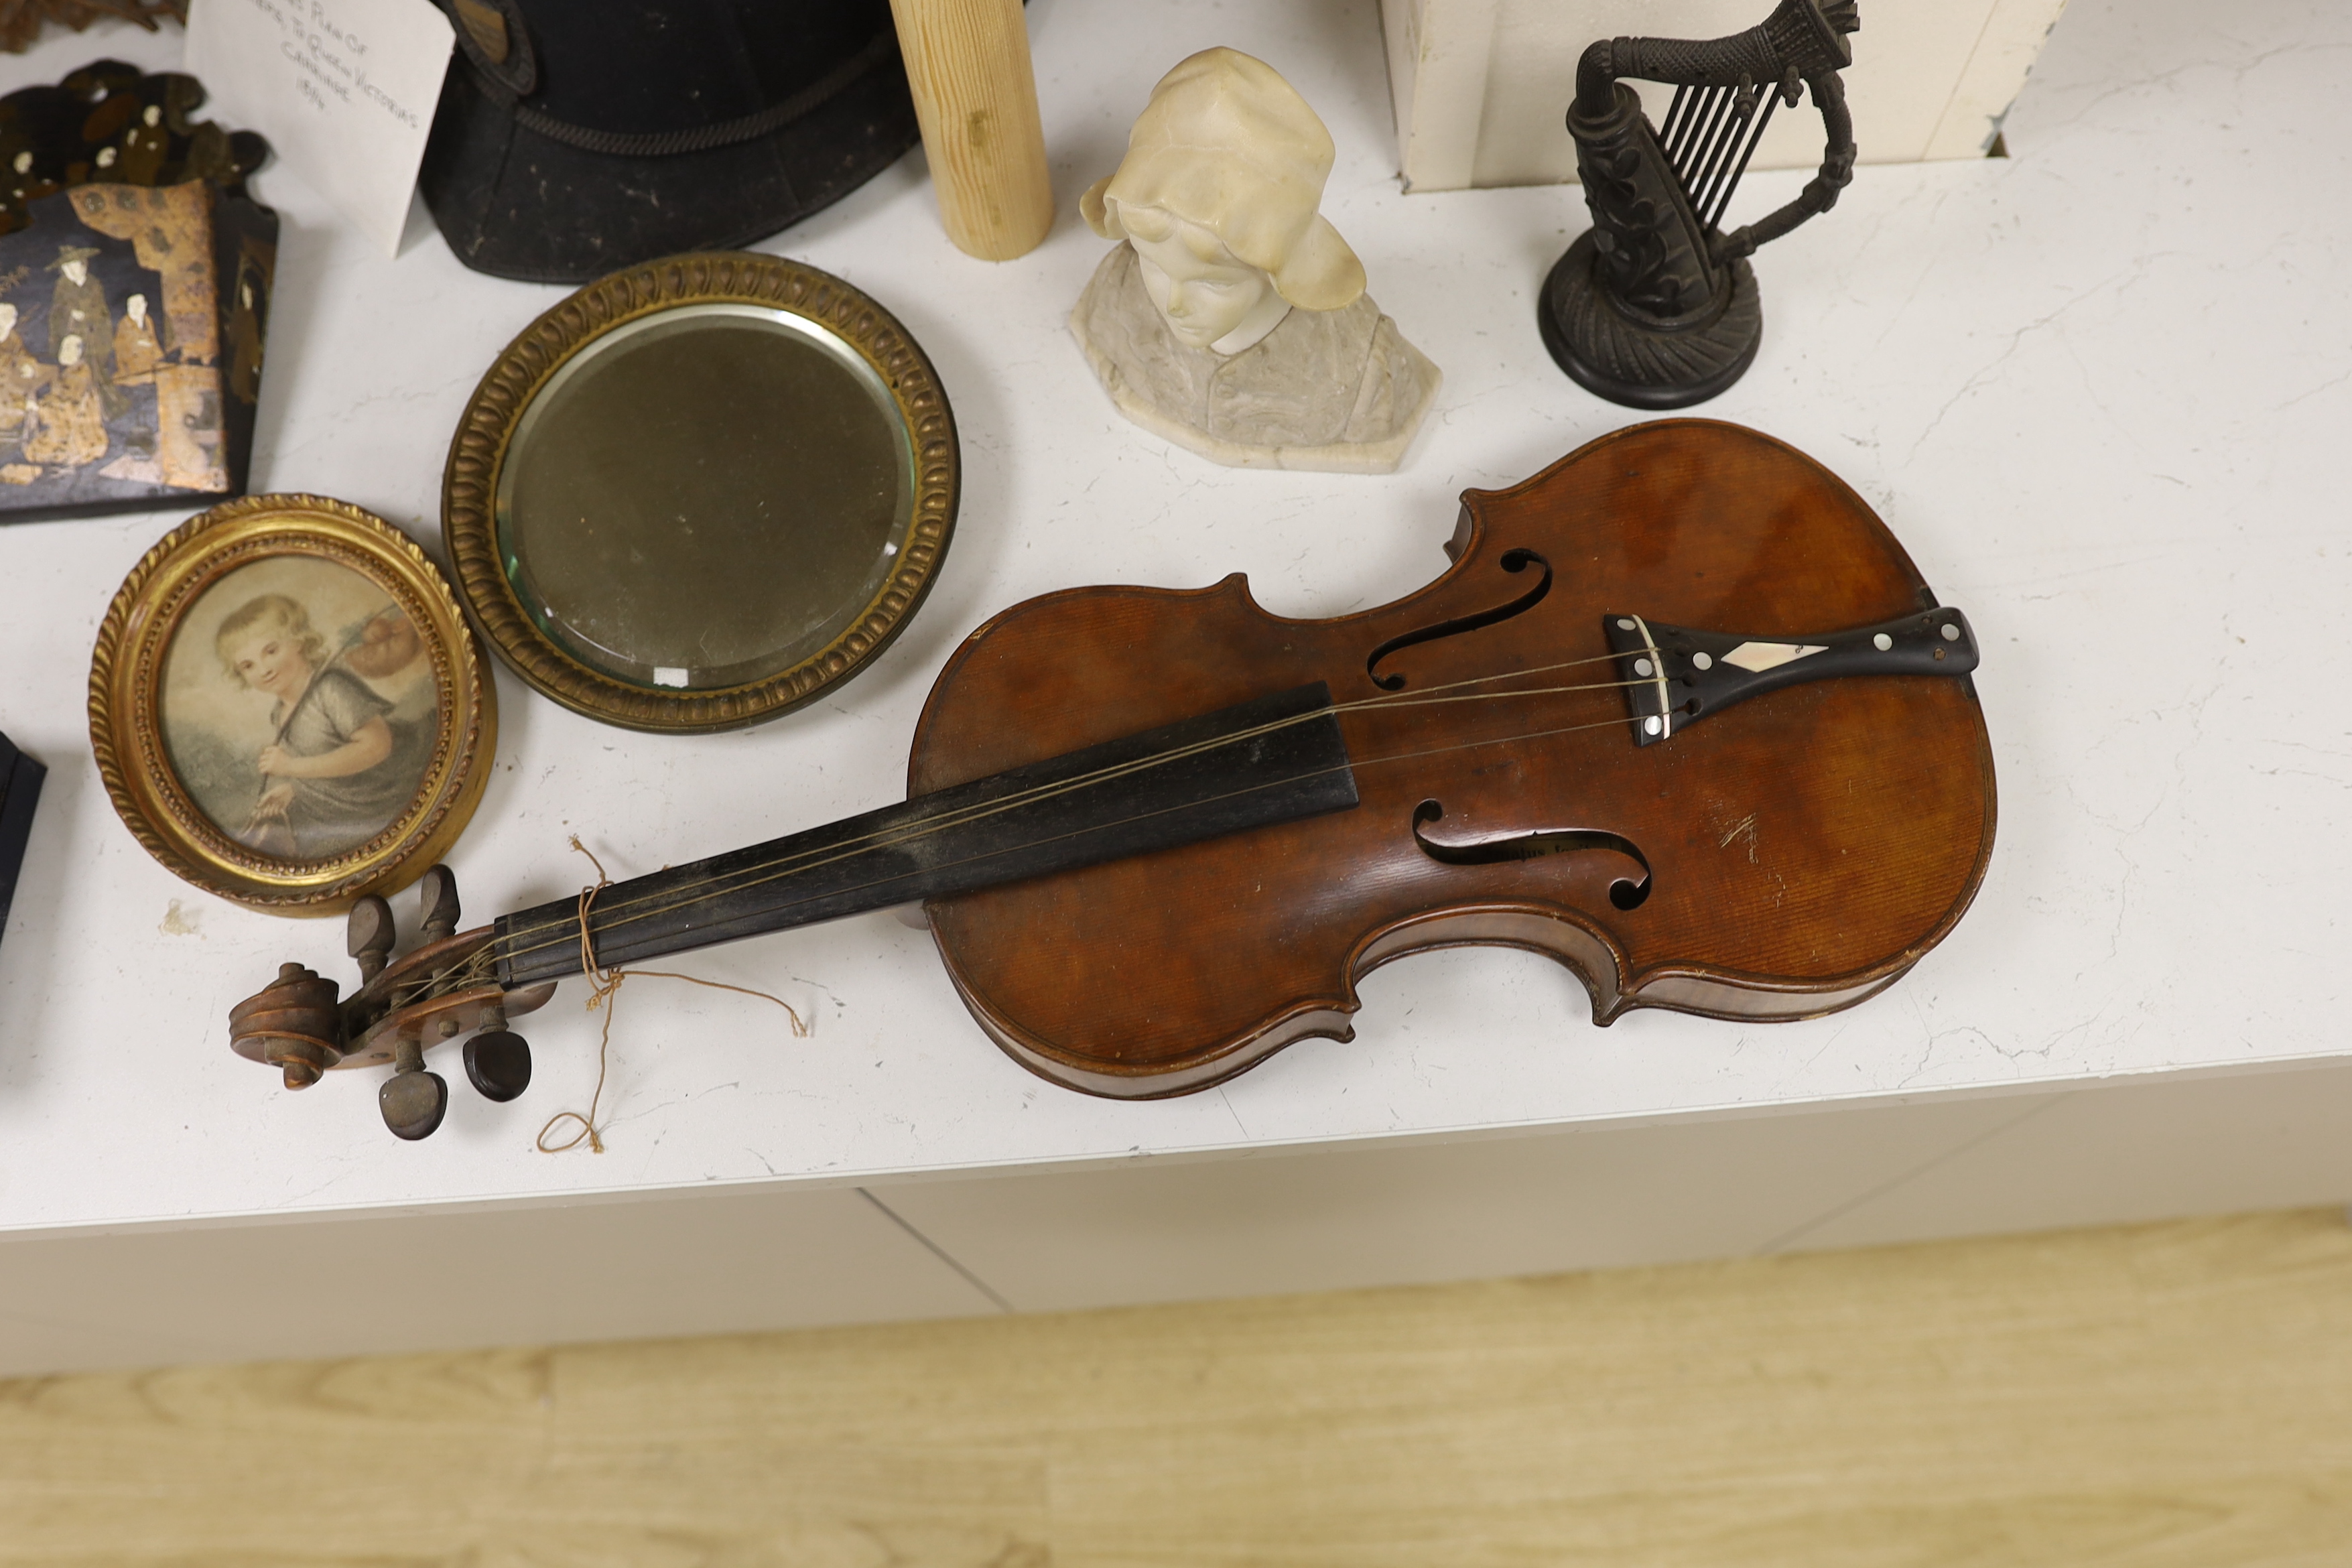 Mixed collectables - An early 20th century violin, interior label reads ‘Nicolaus Amatus fecit in - Image 7 of 7